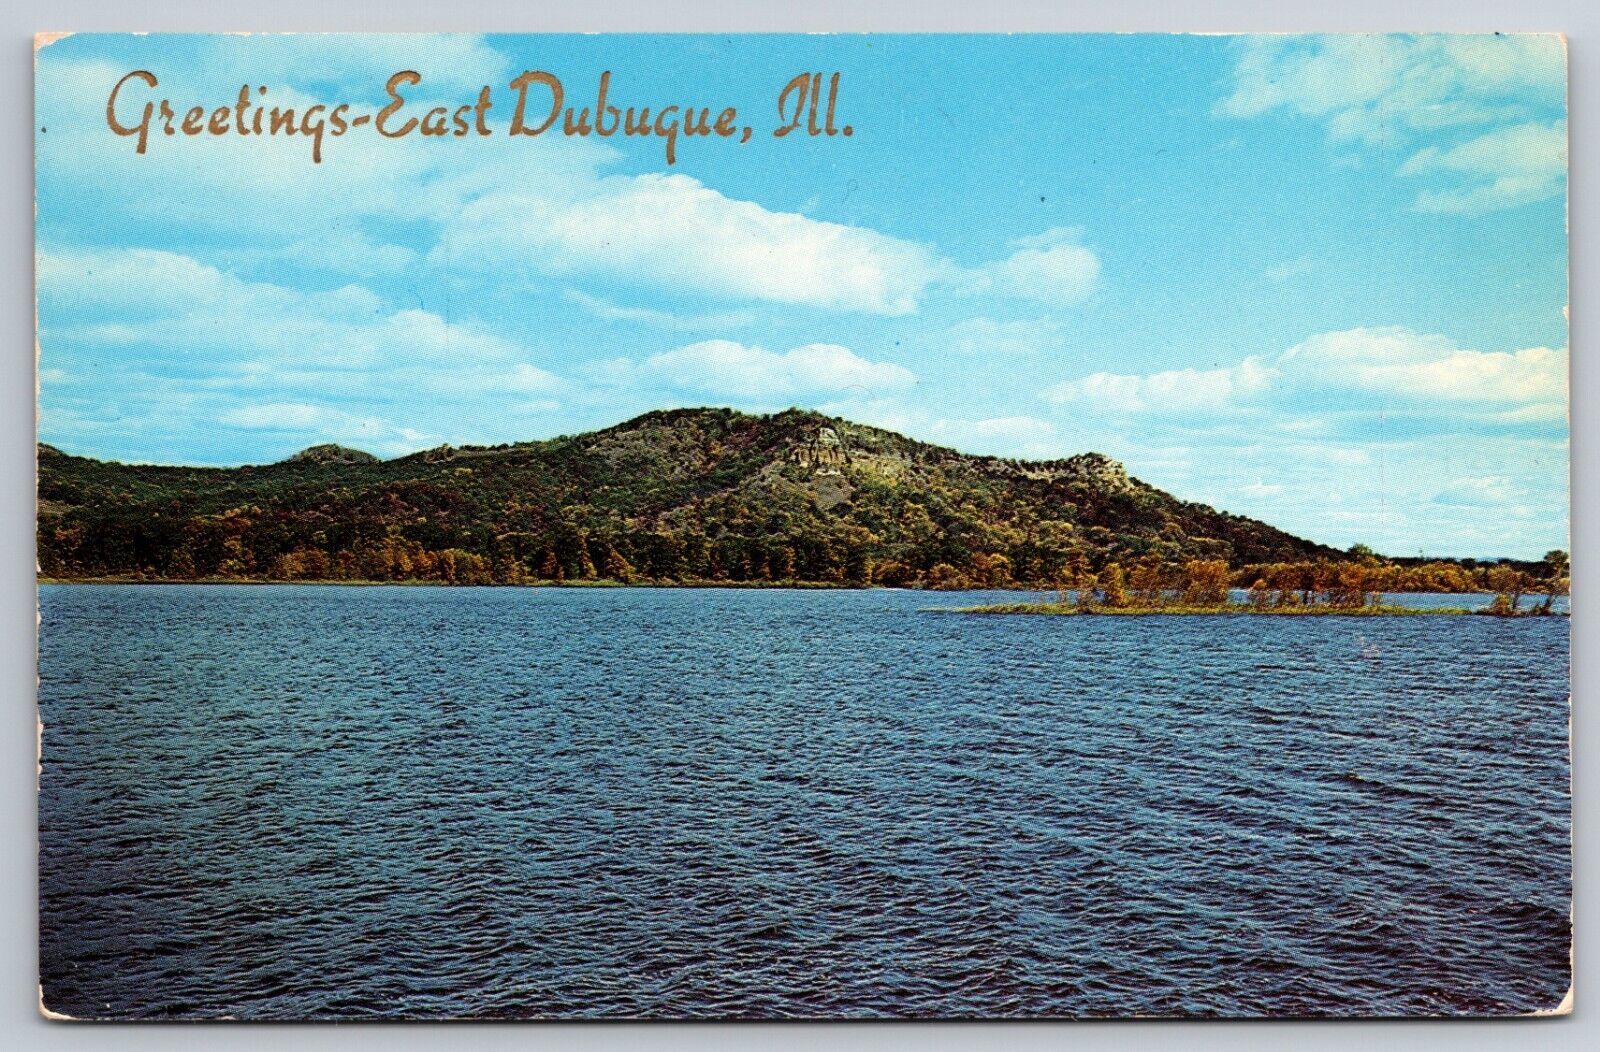 Greetings East Dubuque Illinois Mississippi River Old Postcard UNPOSTED Vintage